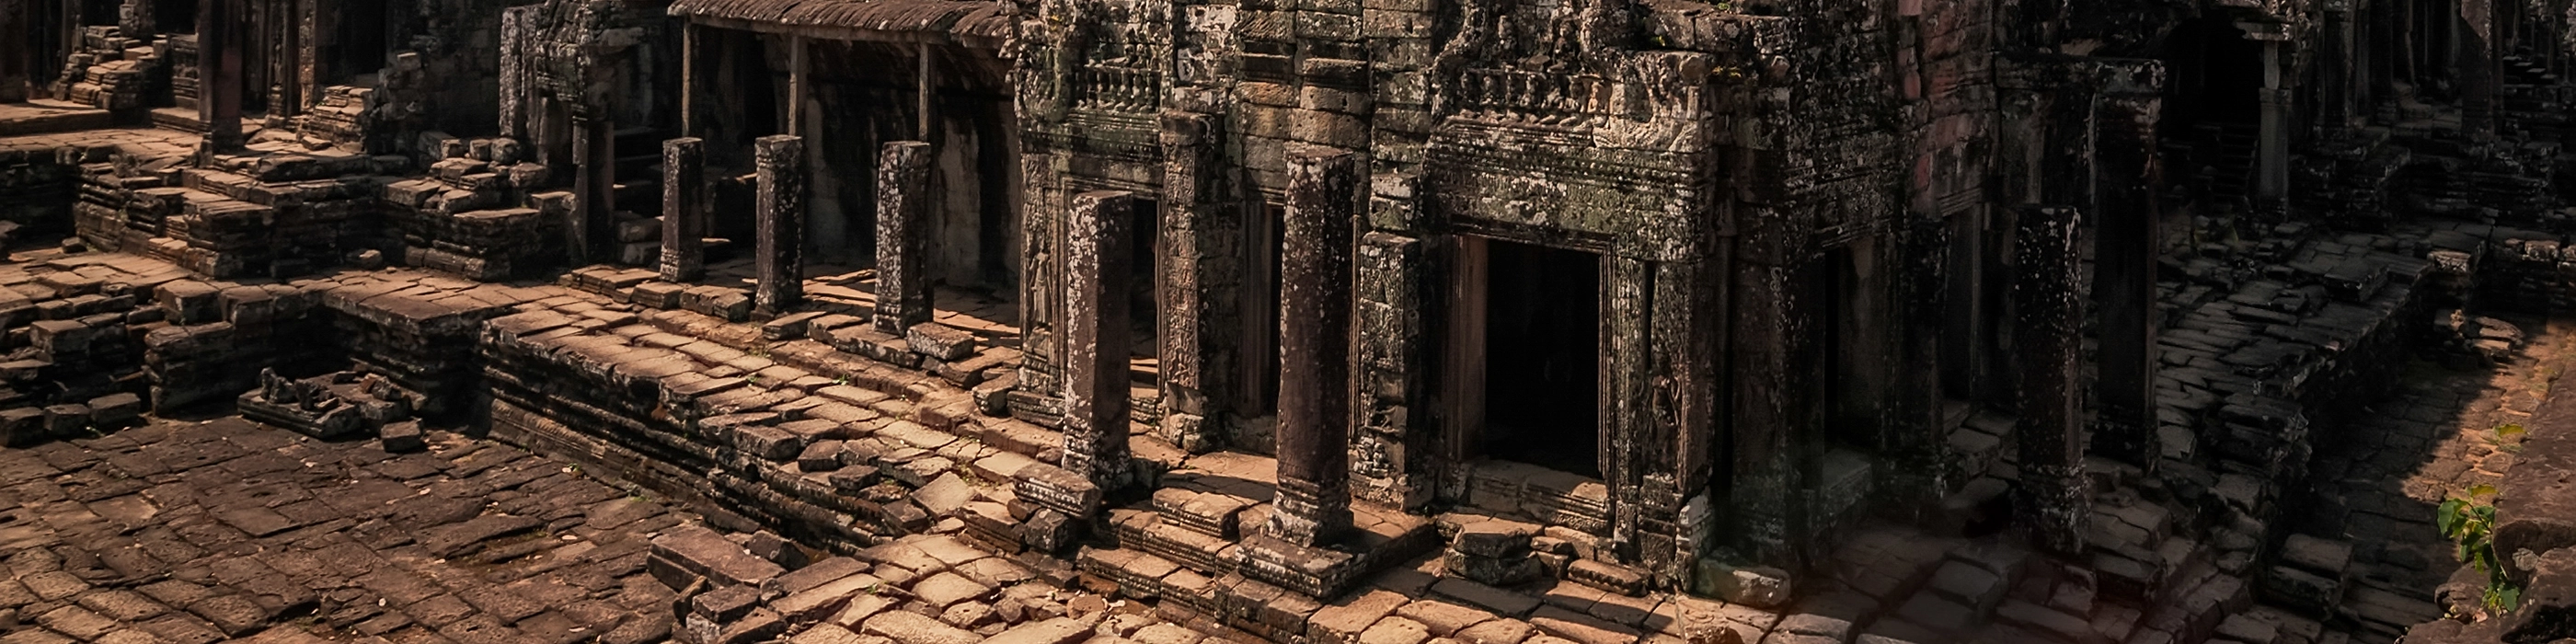 Ancient Angkor Wat temple complex surrounded by lush greenery in Cambodia